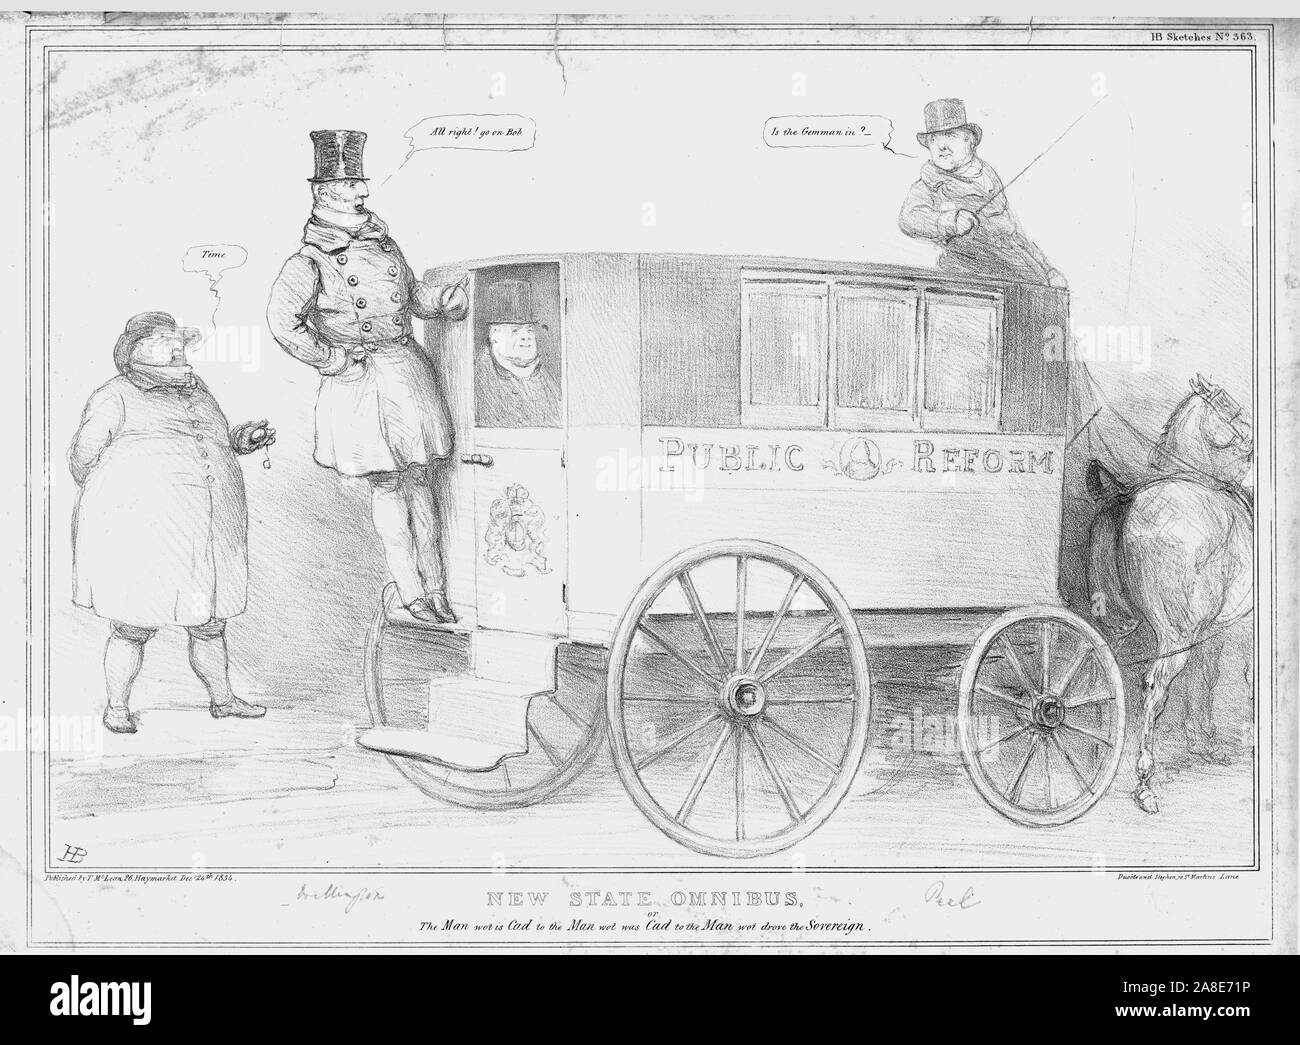 'New State Omnibus, or the Man wot is Cad to the Man wot was Cad to the Man wot drove the Sovereign', 1834. John Bull says 'Time'; Arthur Wellesley, 1st Duke of Wellington, says to the coach driver Sir Robert Peel: 'All right! go on Bob'. 'Is the Gemman [German] in?' asks Peel, meaing the passenger, King William IV. Satirical cartoon by 'H.B.' (John Doyle). [Thomas McLean, London, 1834] Stock Photo